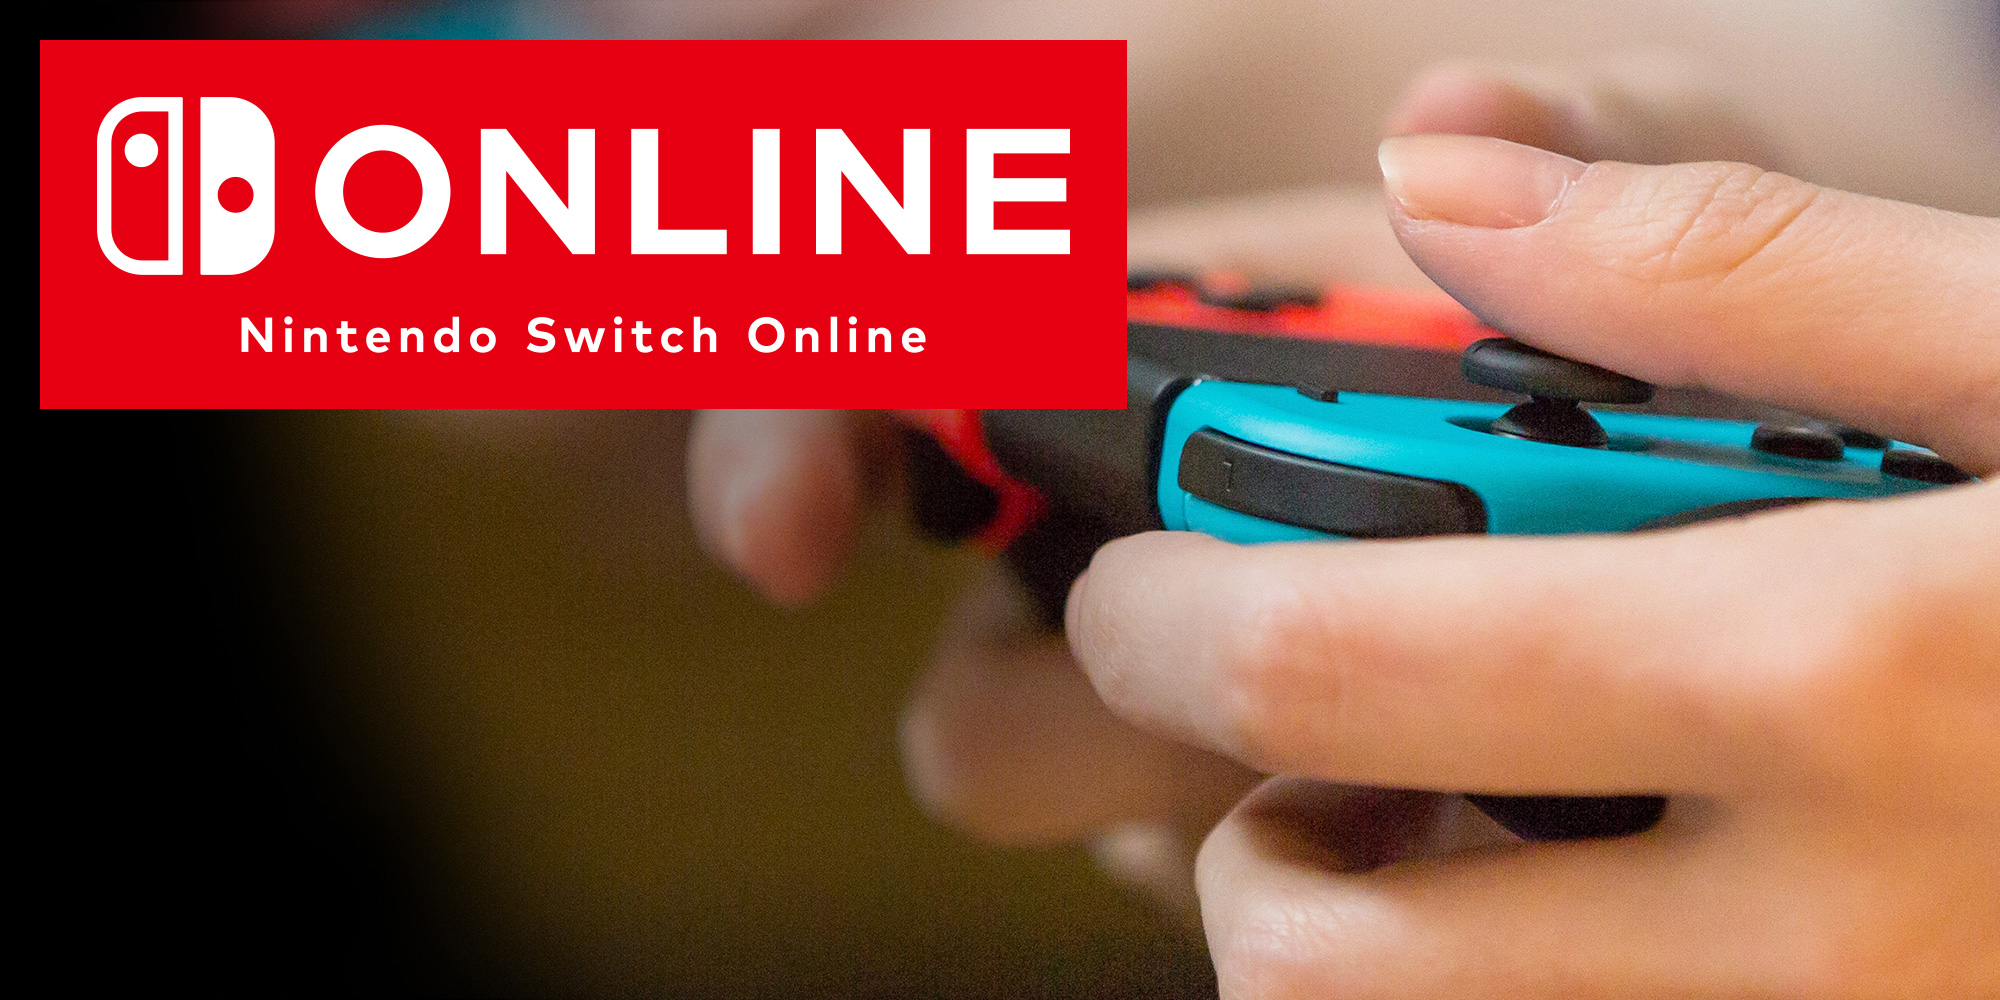 Nintendo requires Switch Online users to sign-in weekly to have uninterrupted service